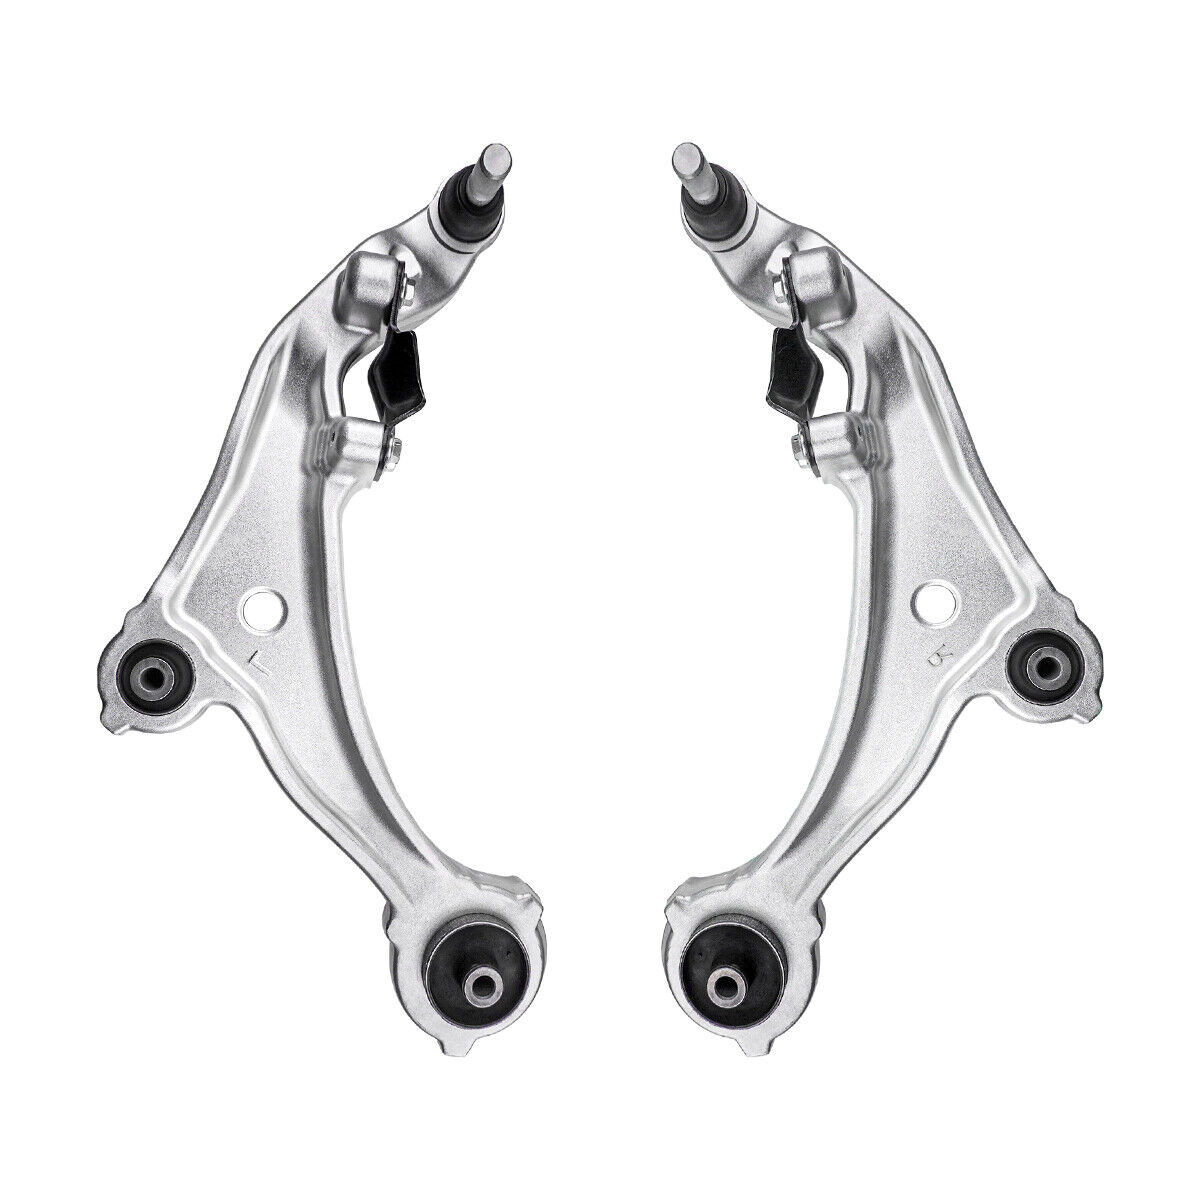 AzbuStag Control Arm Kit with Ball Joint for 2007-2013 Nissan Altima - 2Pcs